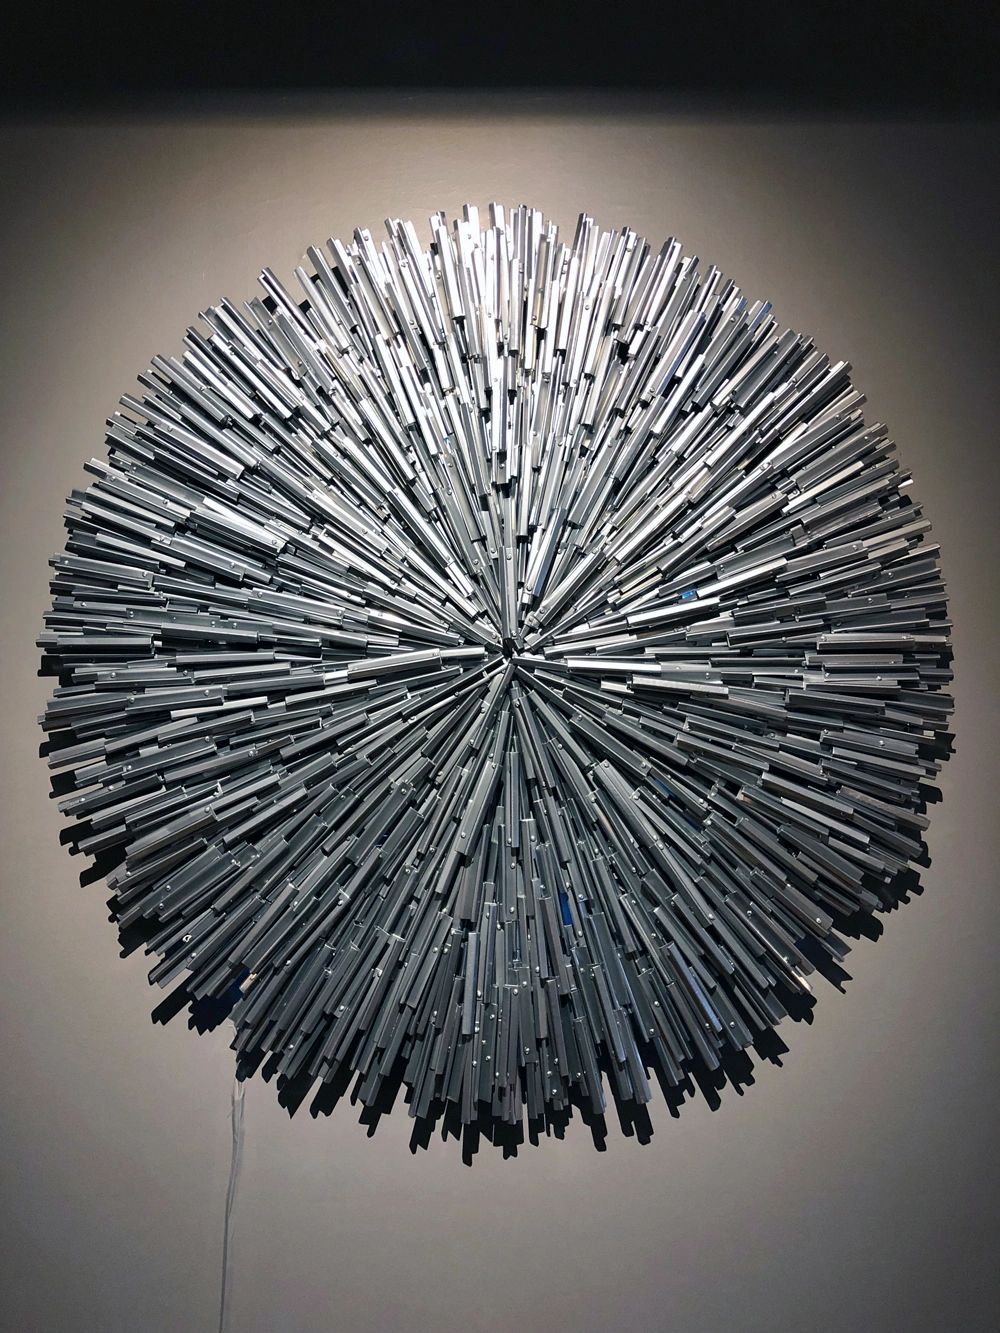 "Astercussion" is a powder coated steel circular sculpture with light radiating from the center.